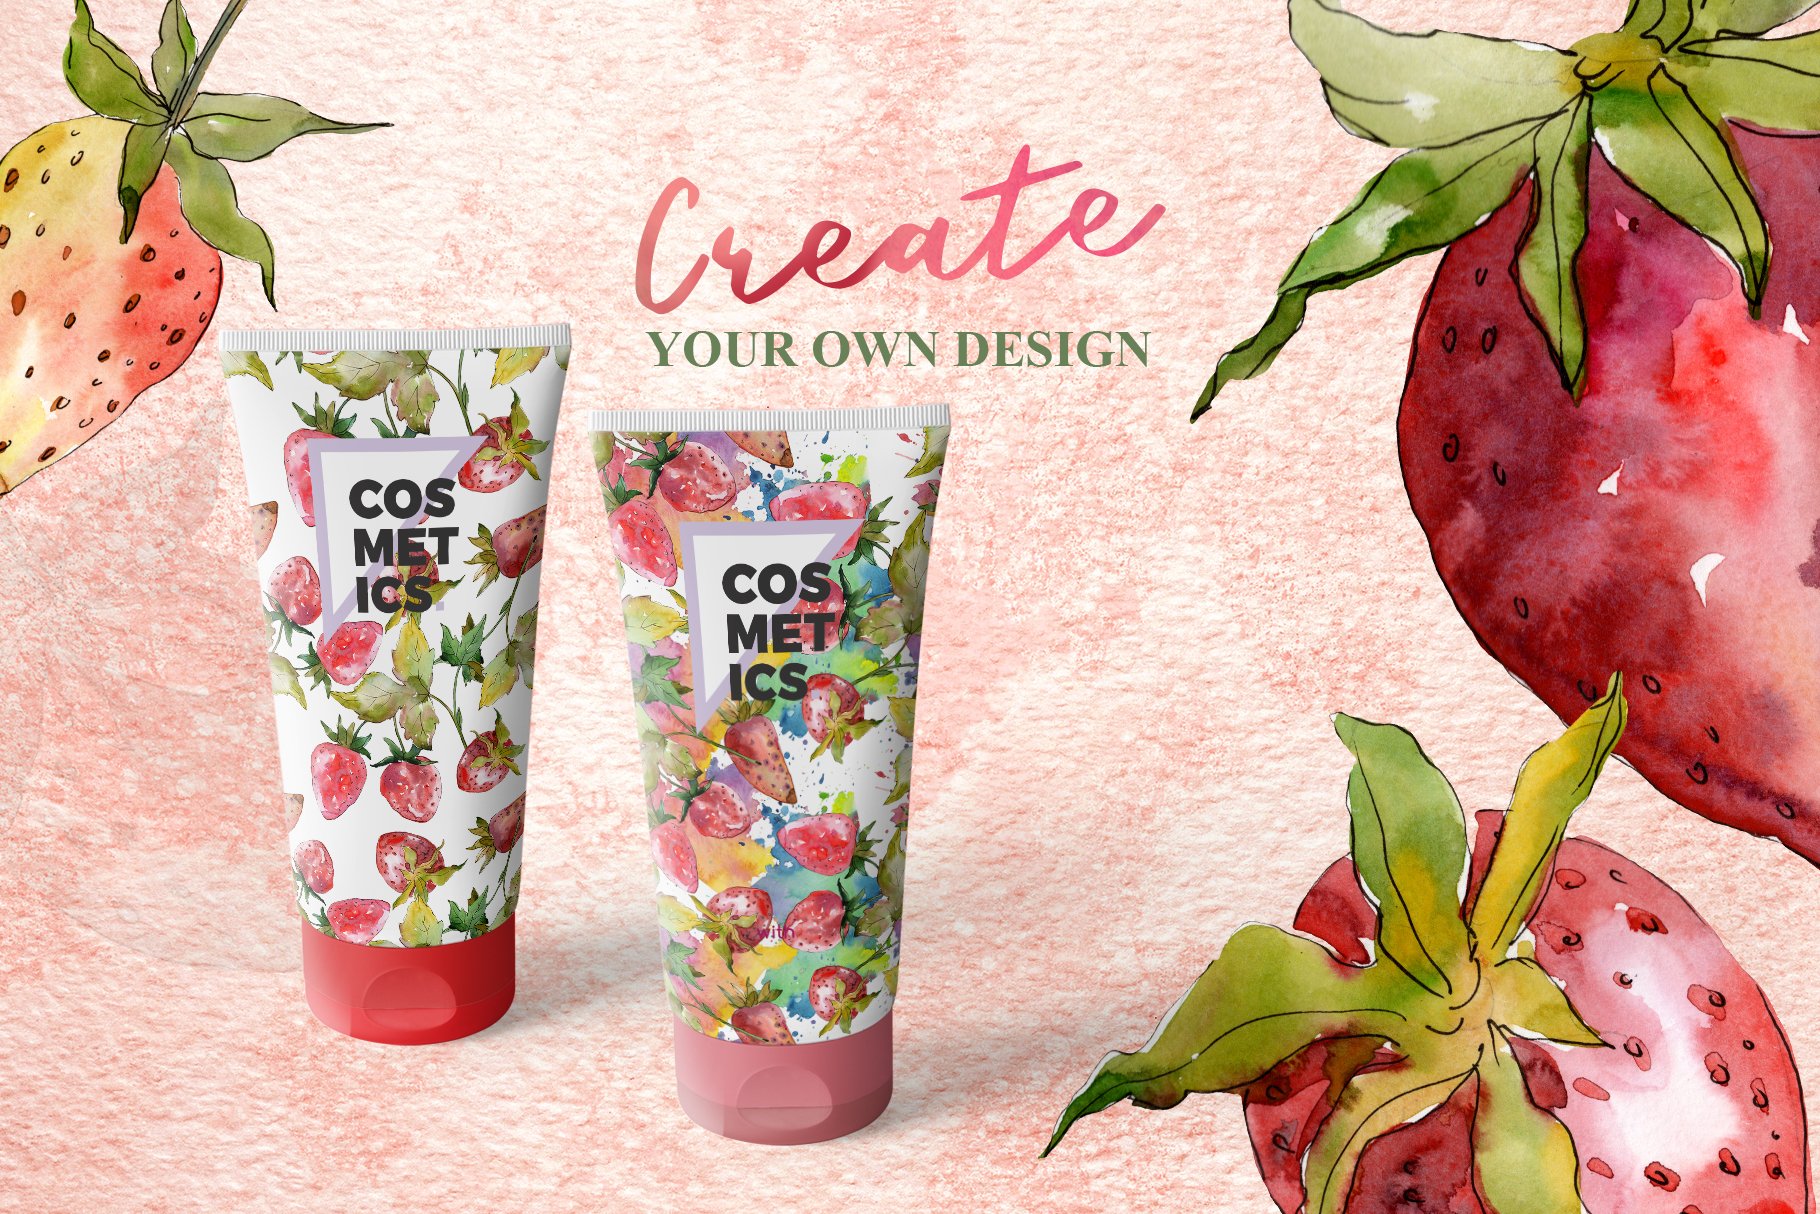 Nice strawberry print for your beauty brand.